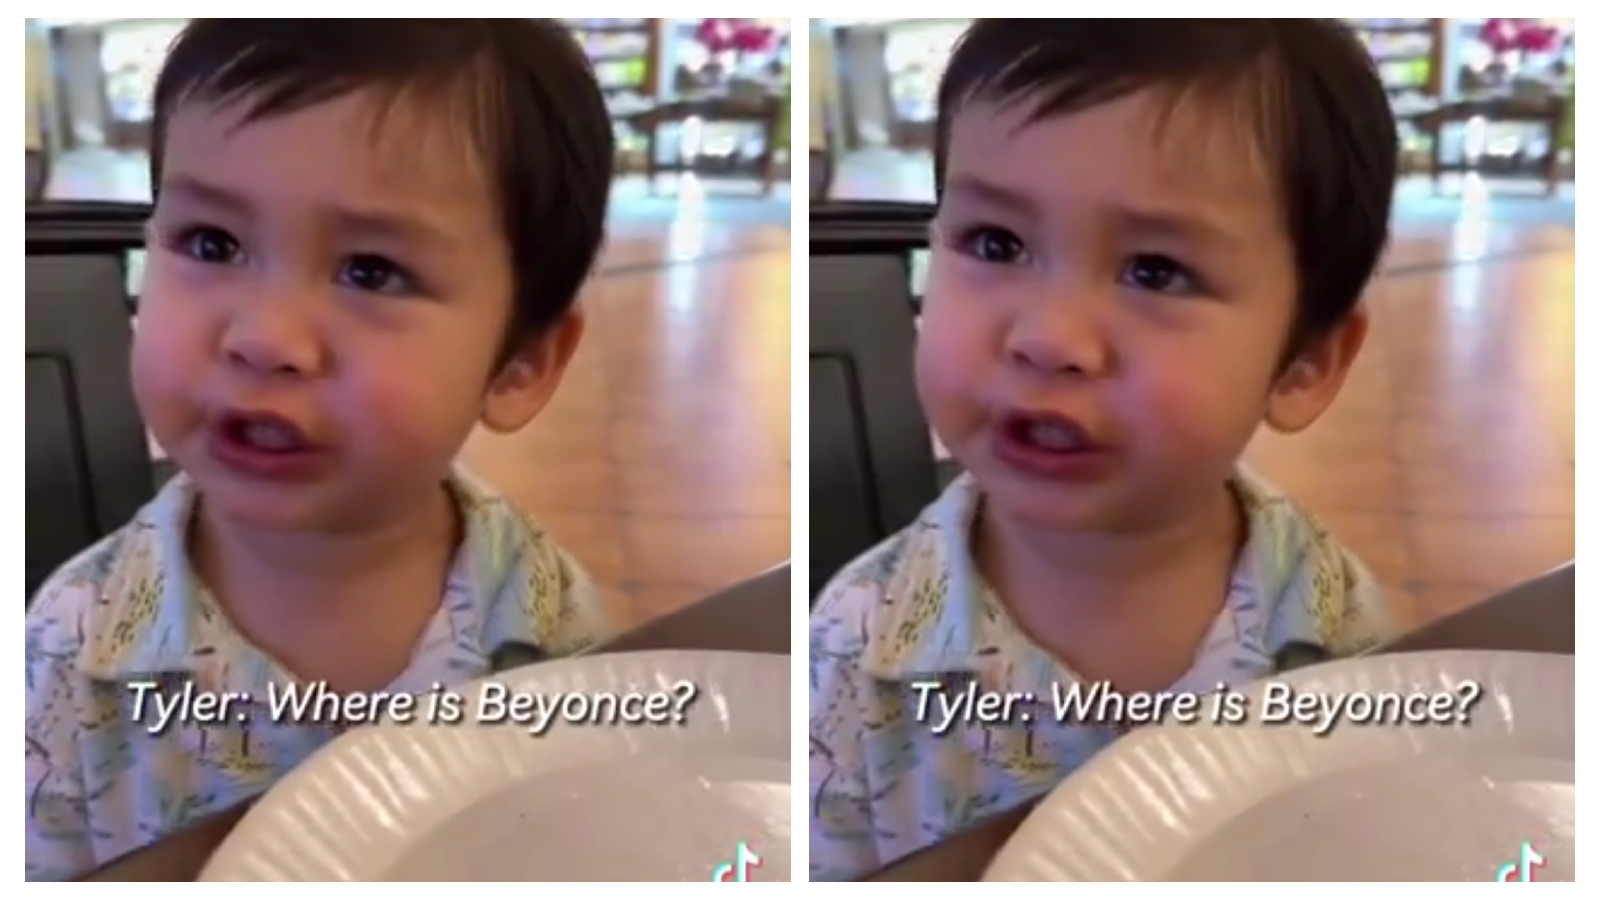 VIDEO Filipino baby Tyler said he is Beyonce friend and